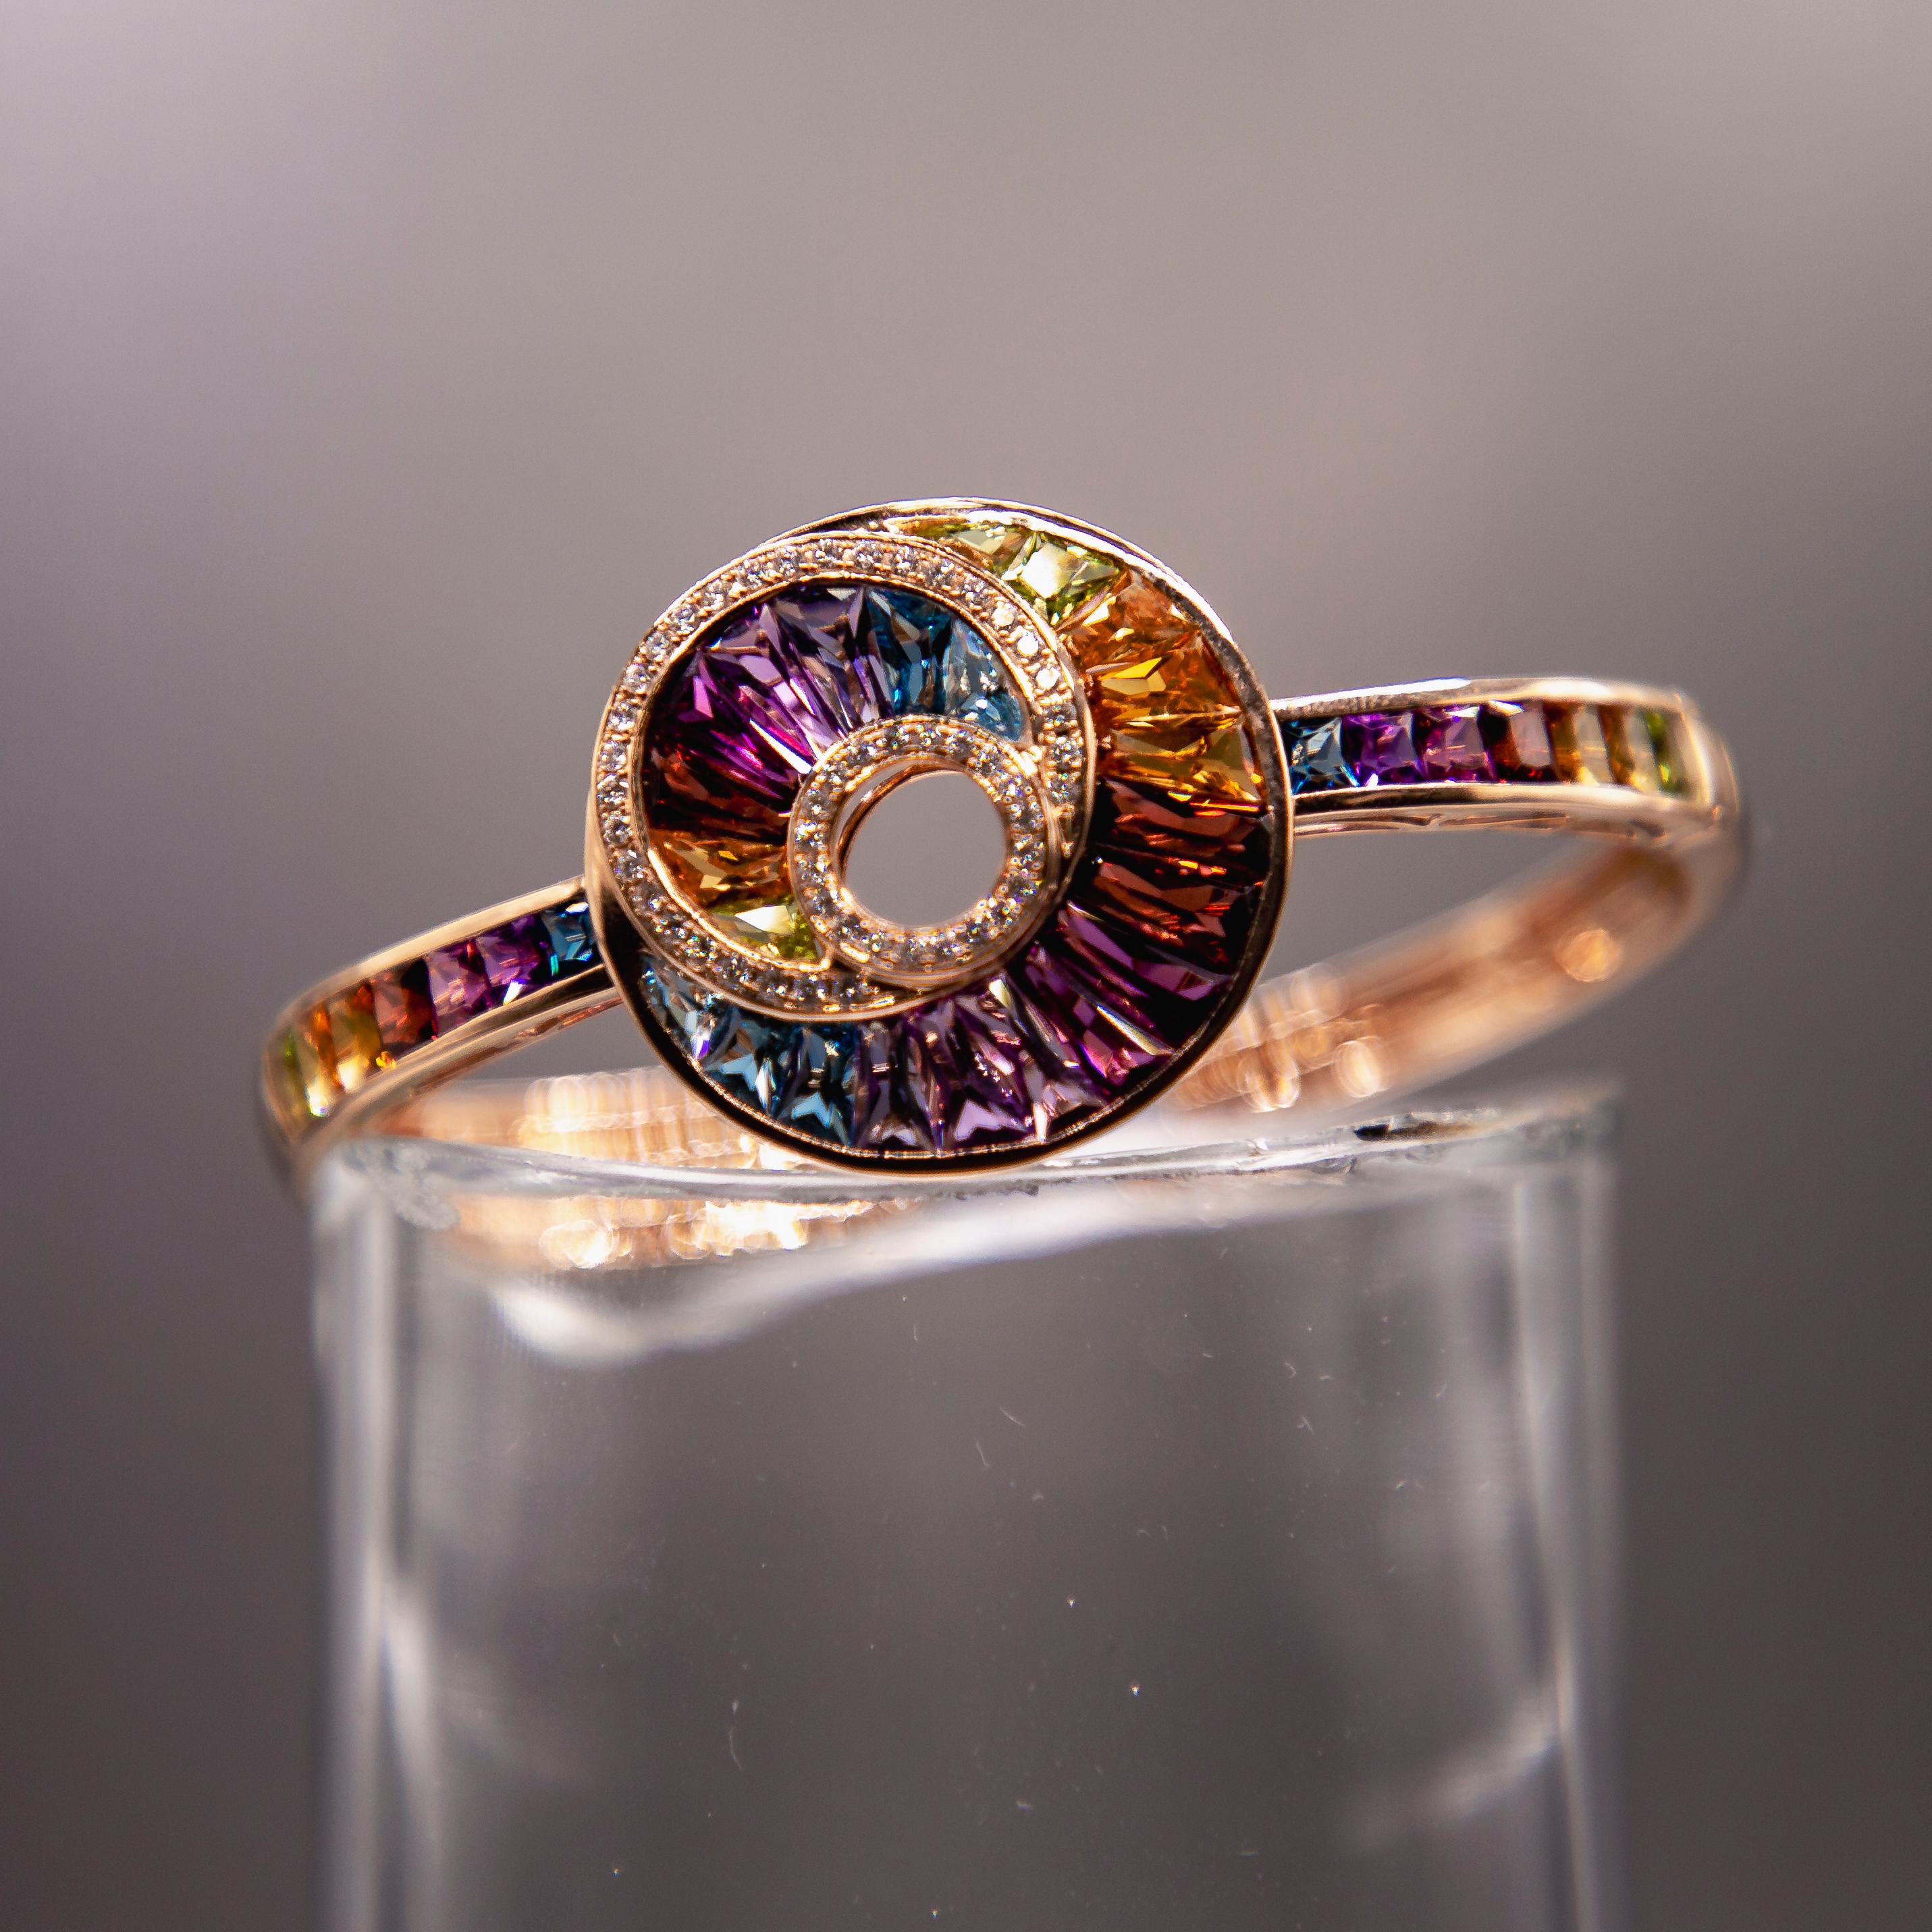 Brilliance and warmth radiate from hand-cut modified baguettes of purple amethysts, burgundy garnets, lemon citrines and blue topazes set in channels in this spectacular handcrafted one of a kind 14 karat rose gold bracelet. The pallet of gems is a